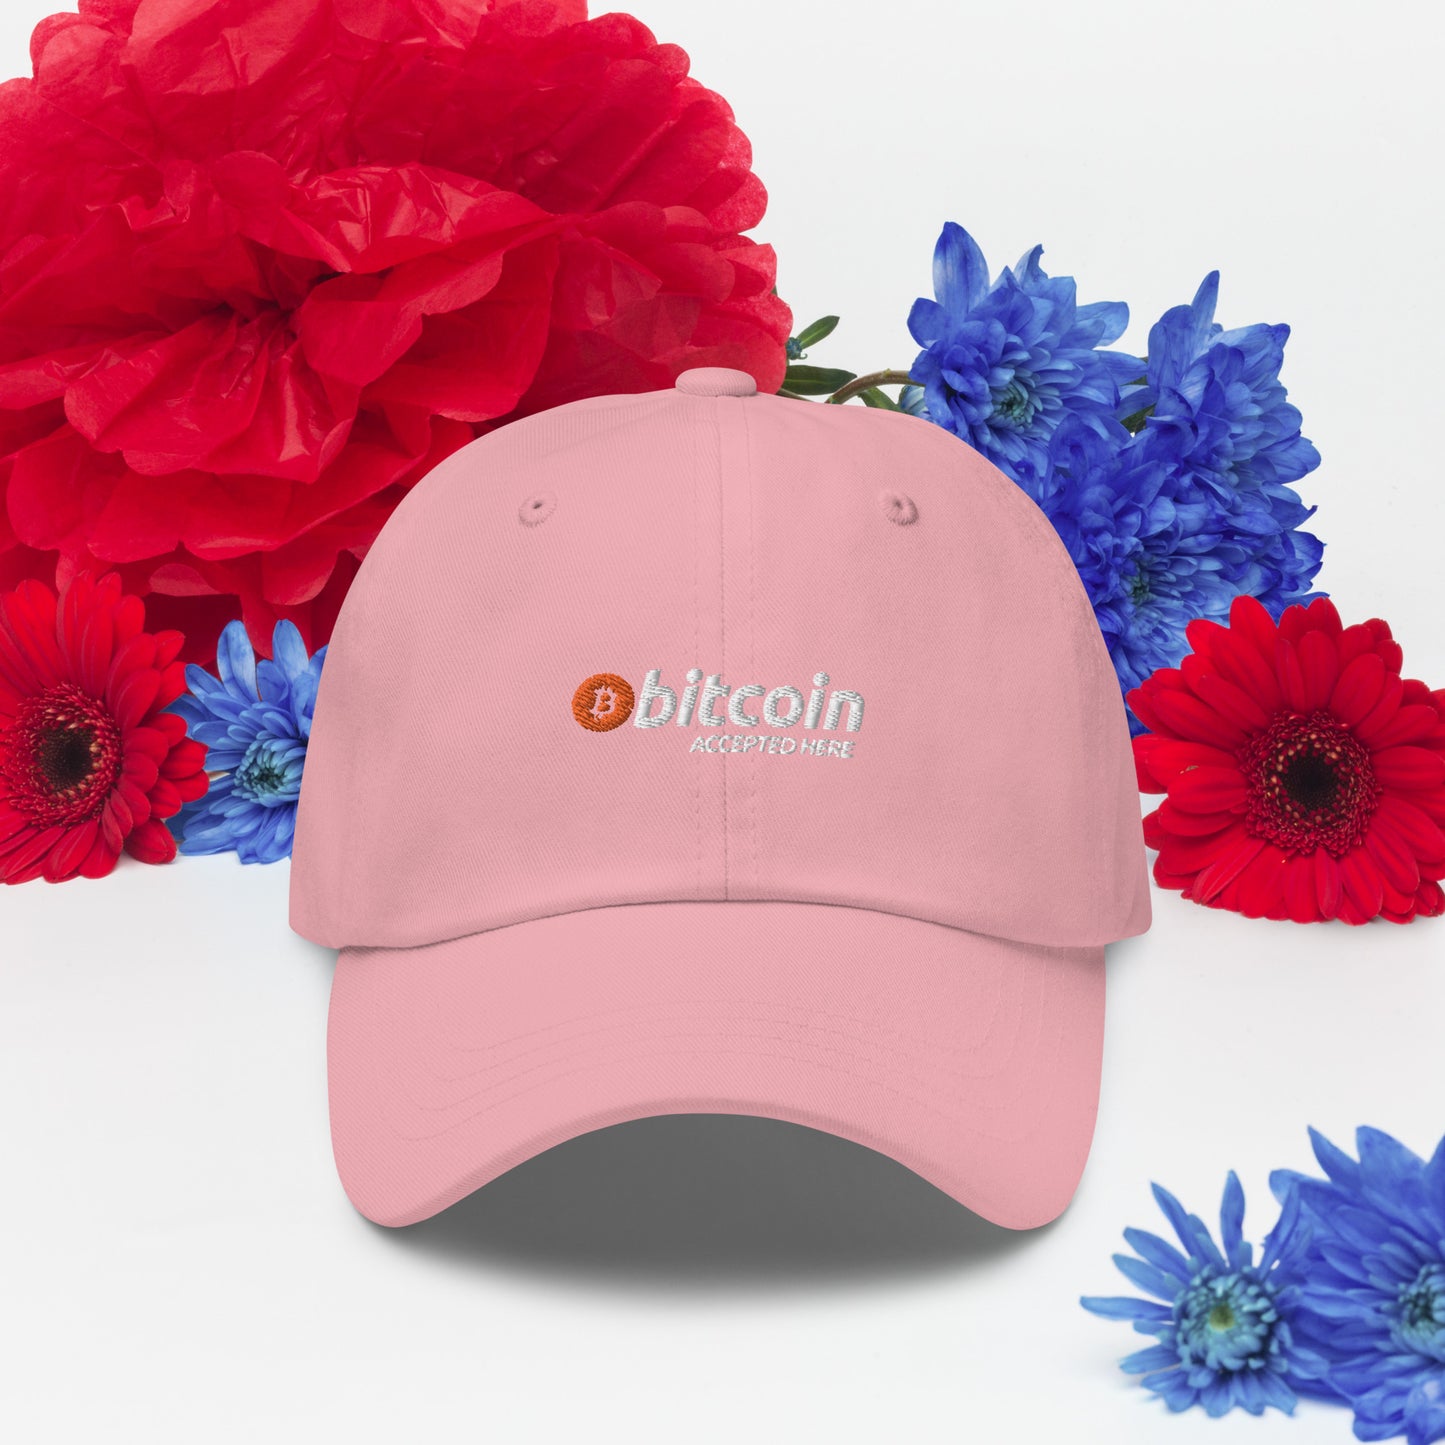 BitcoinAccepted - Dad hat